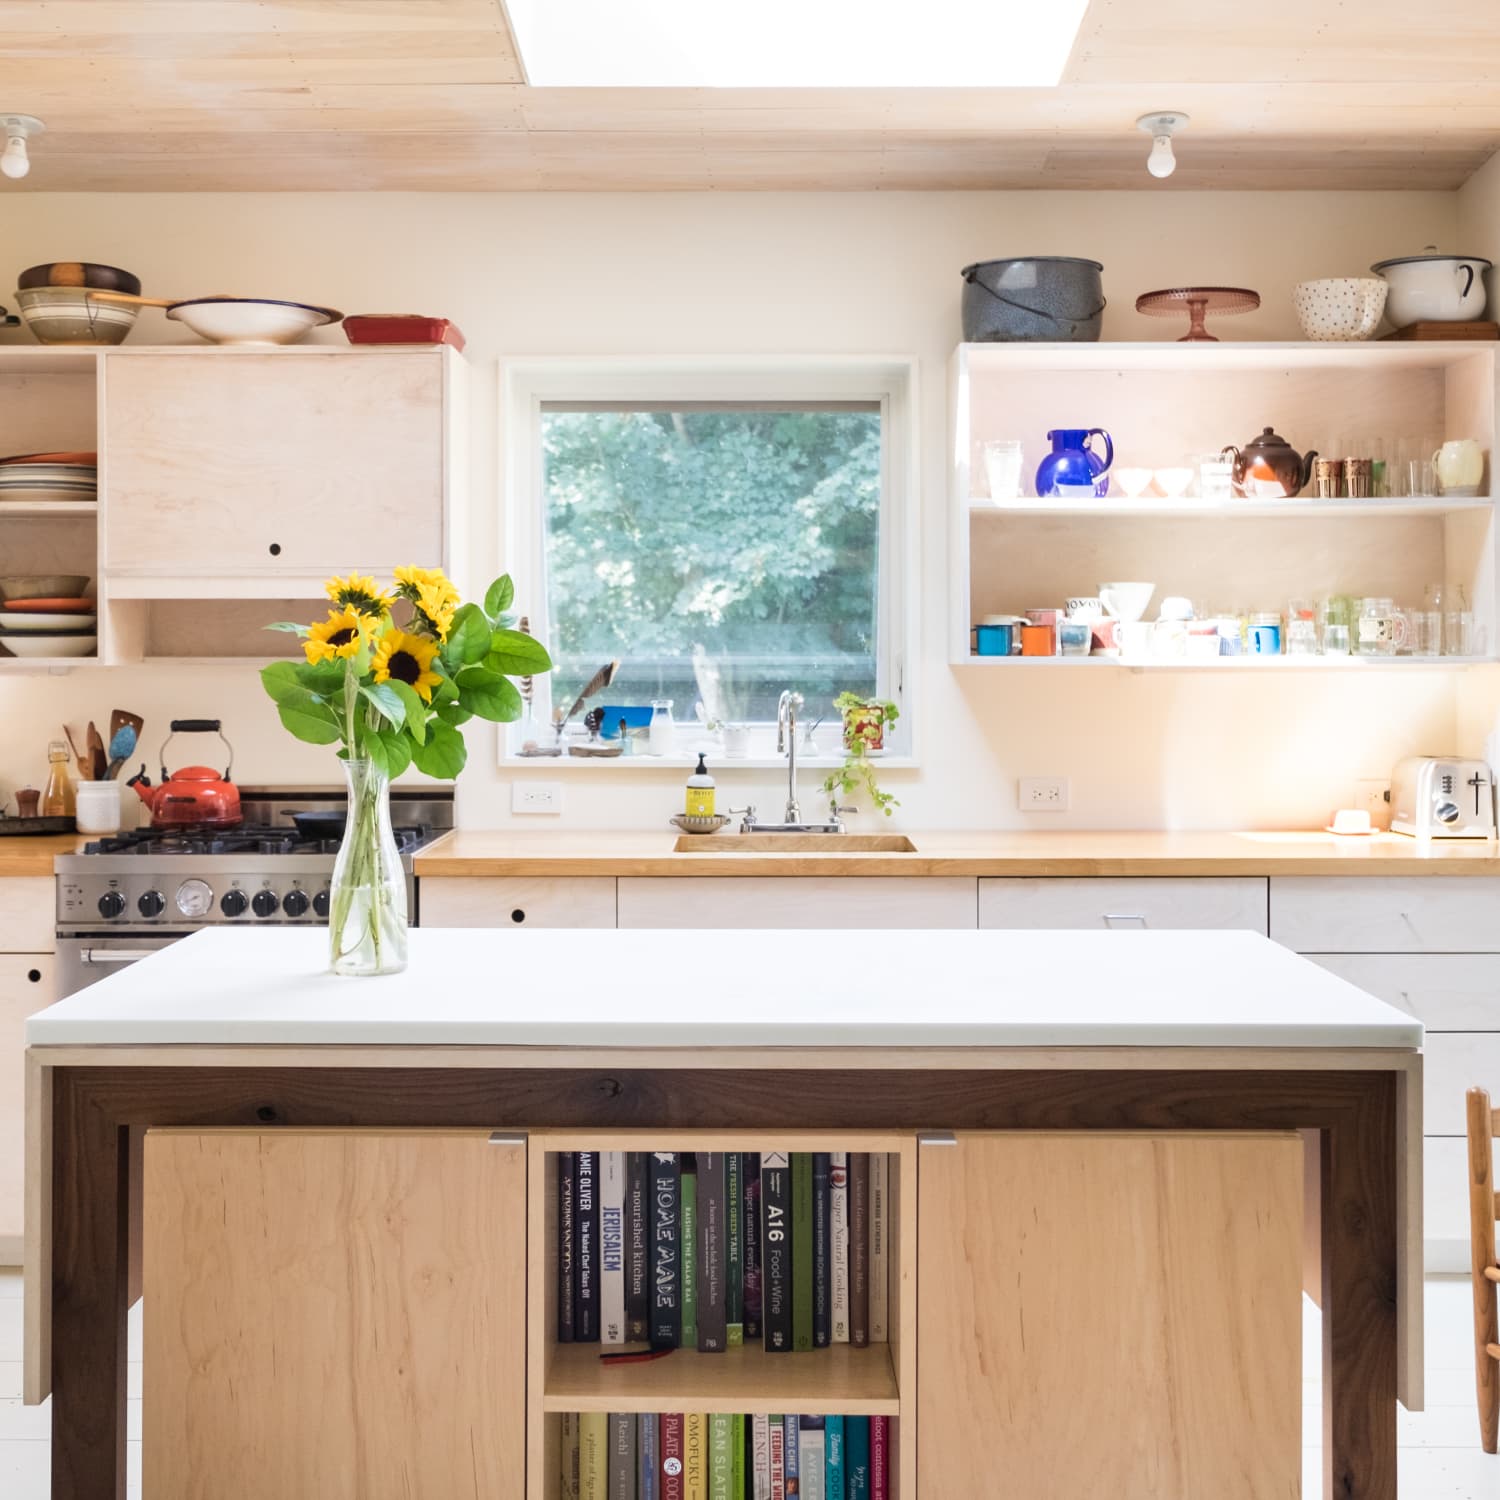 Tips to Keep Kitchen Clean and Organized - Our Oily House